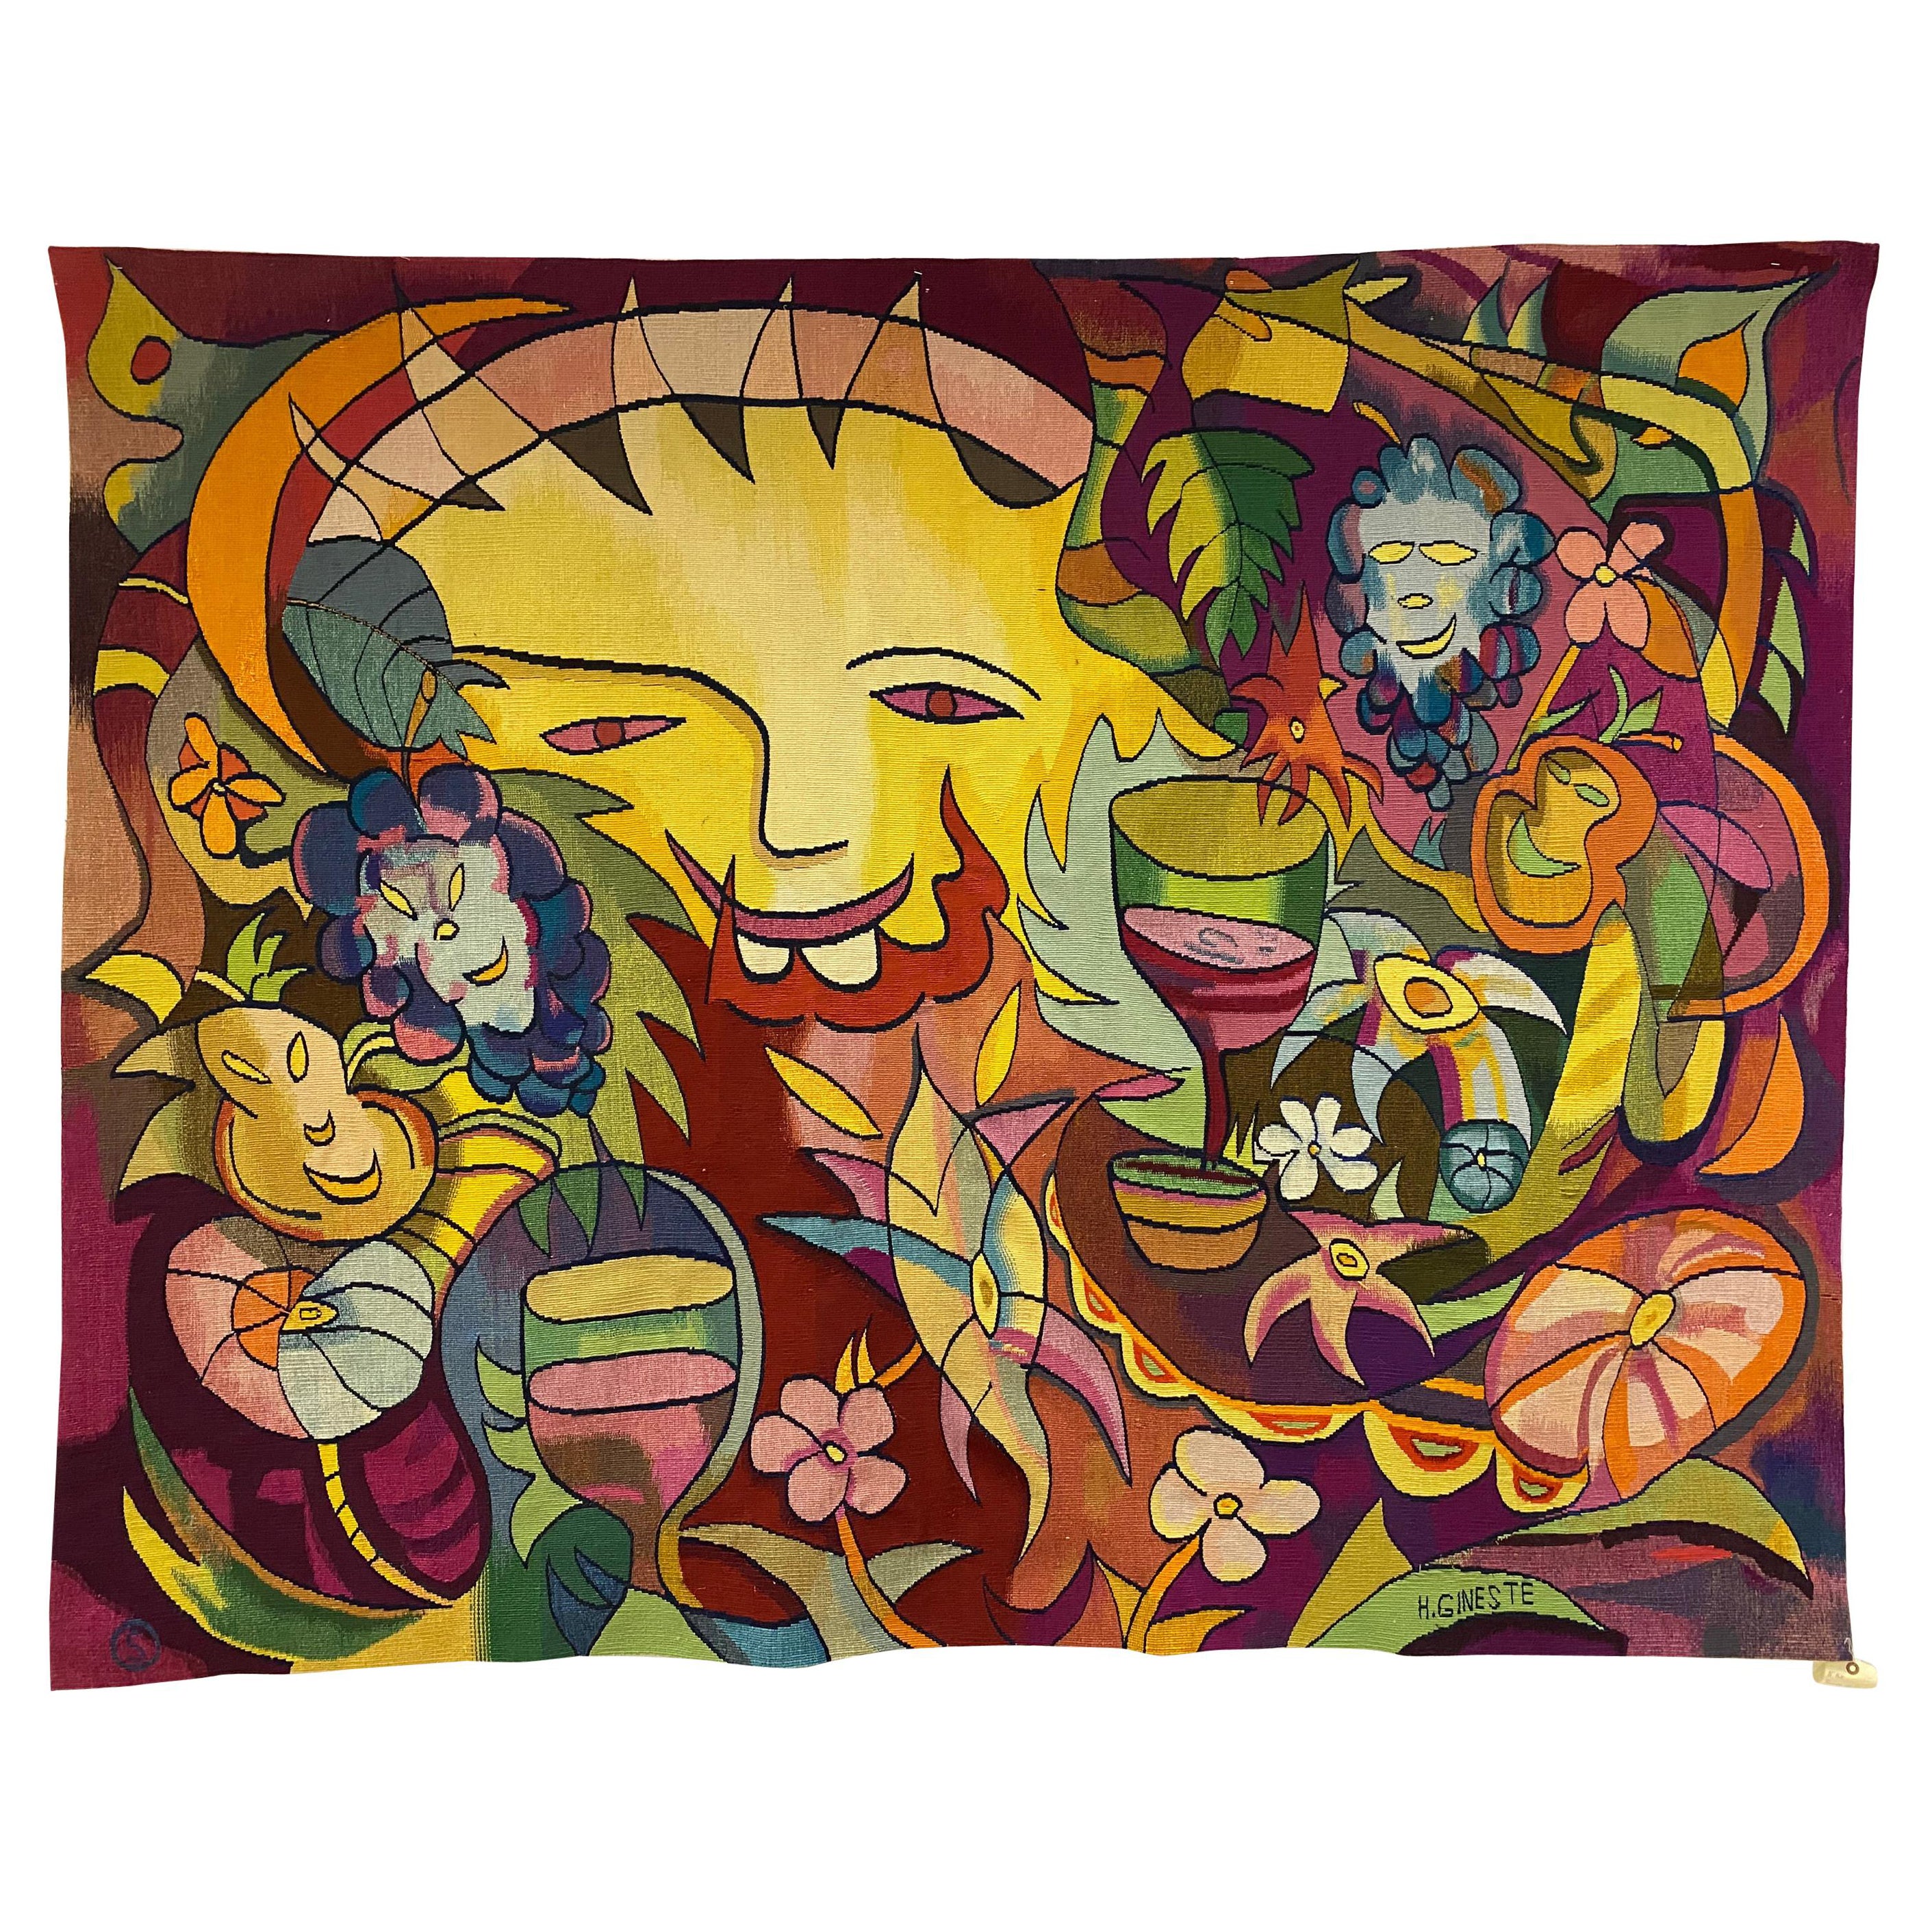 Aubusson Tapestry by H.Gineste "Drunk Sun" Woven in Soana Workshop